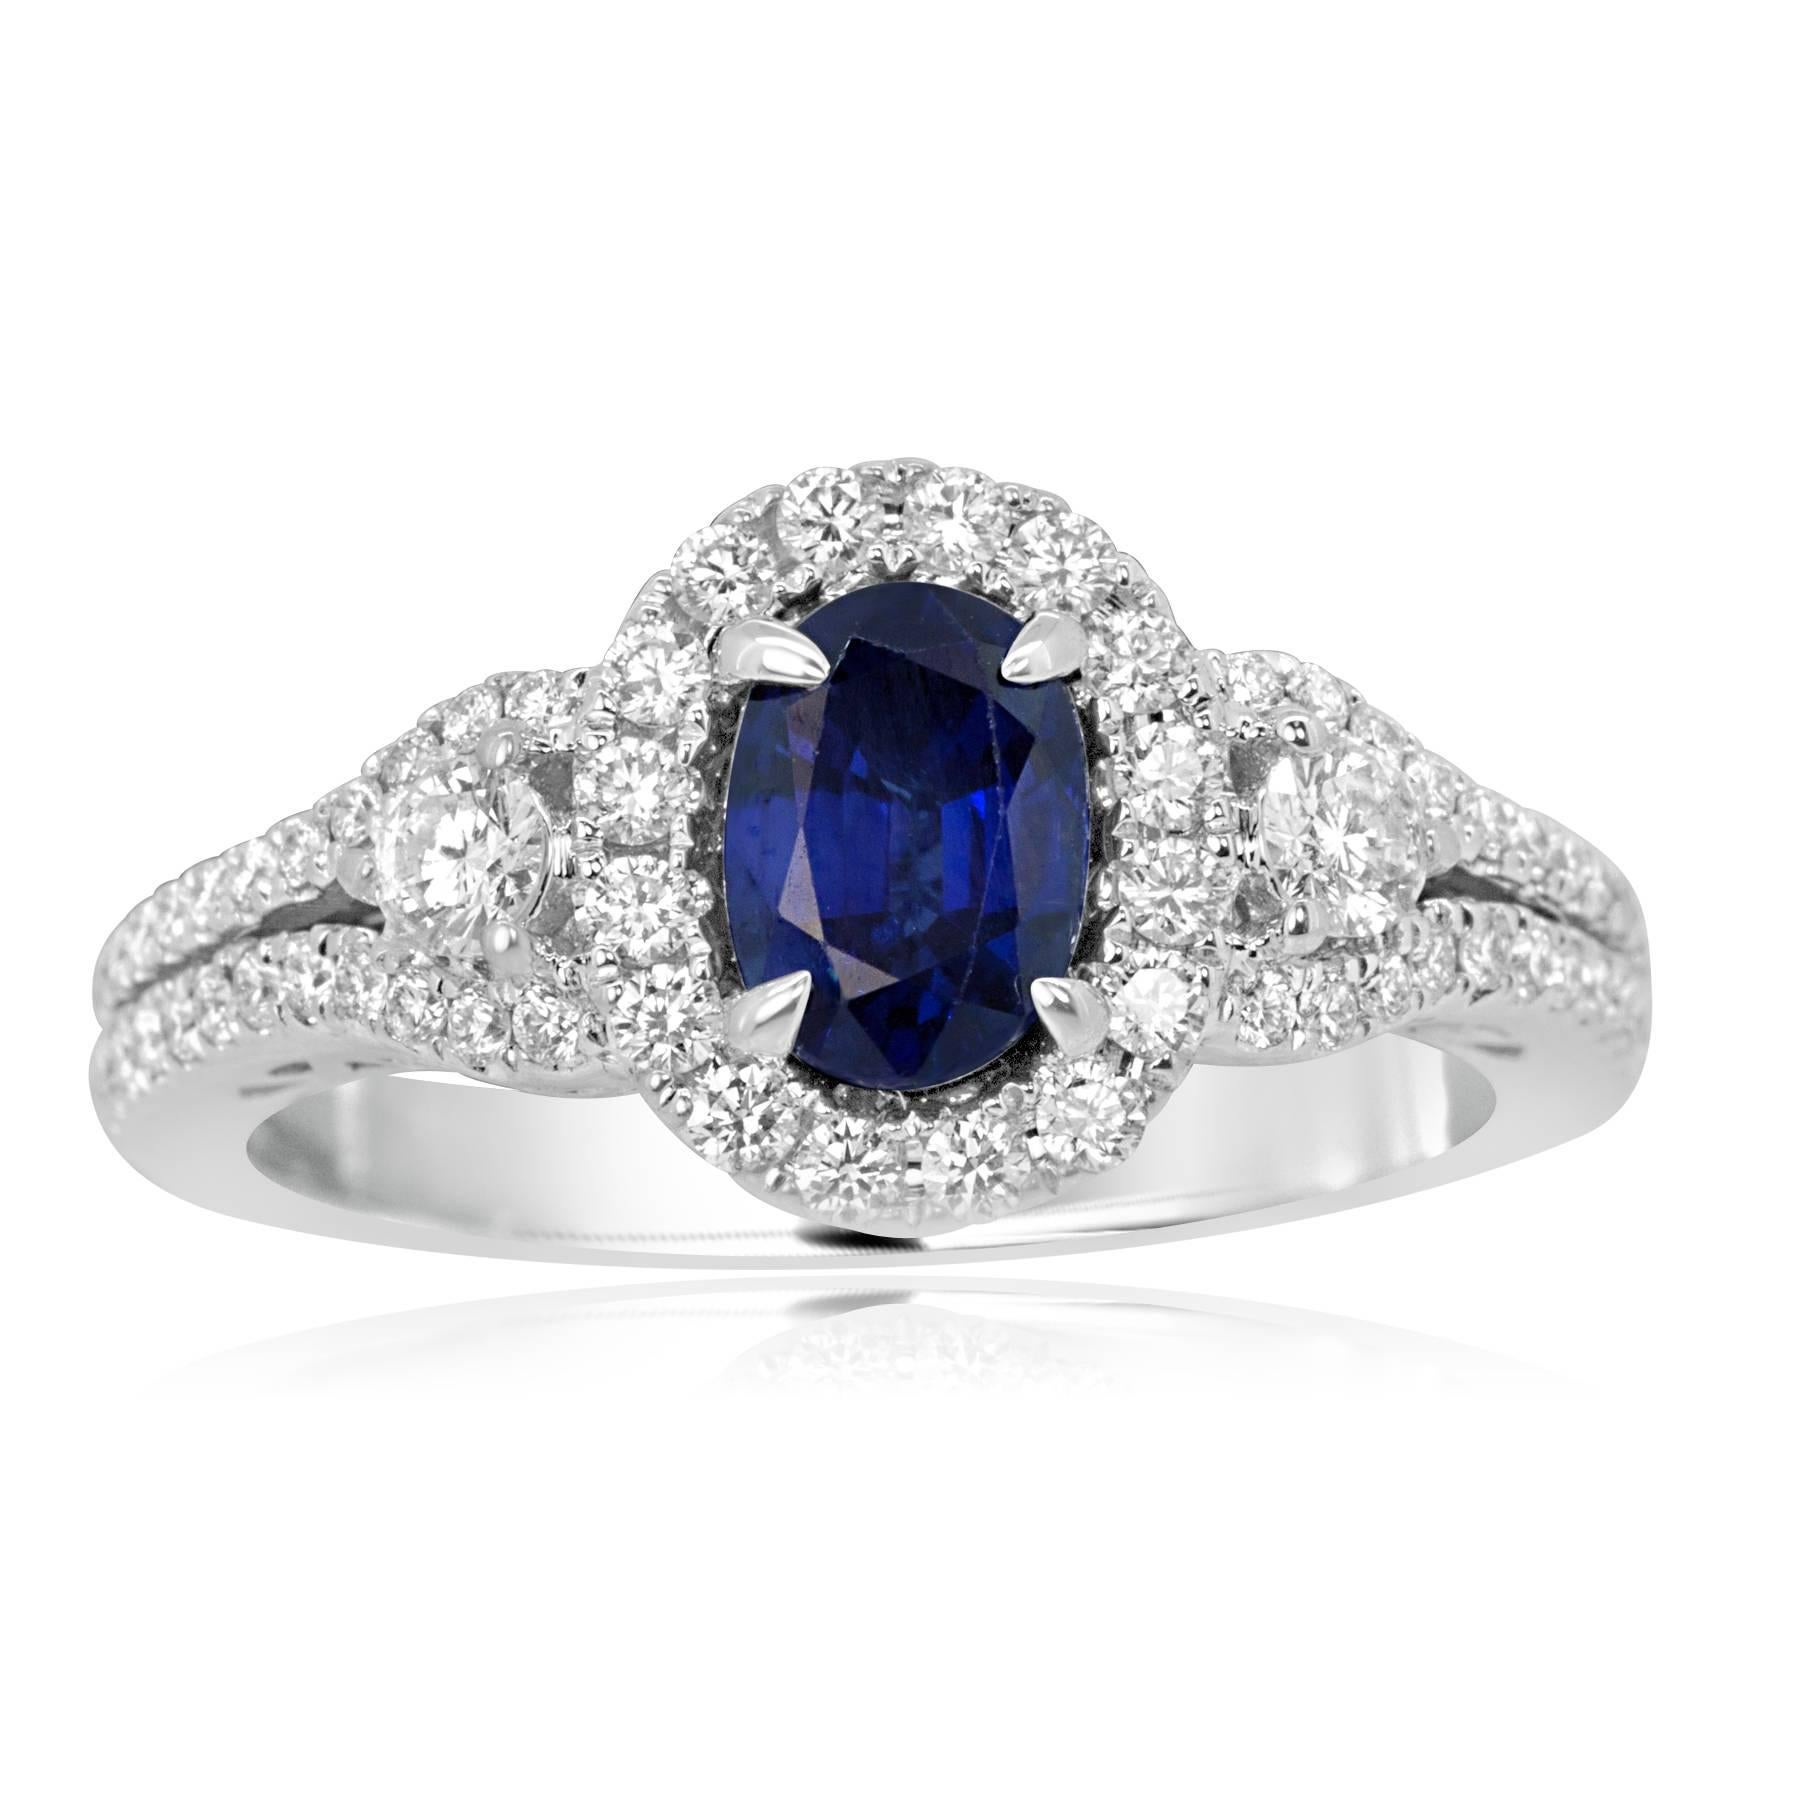 1.00 Carat Blue Sapphire Oval Encircled by Halo of White 0.47  Diamond  Carat Flanked by 2 White Diamond 0.15 Carat in 14K white Gold Two row shank Ring. Total Weight 1.62 Carat.

Style available in different price ranges. Prices are based on your